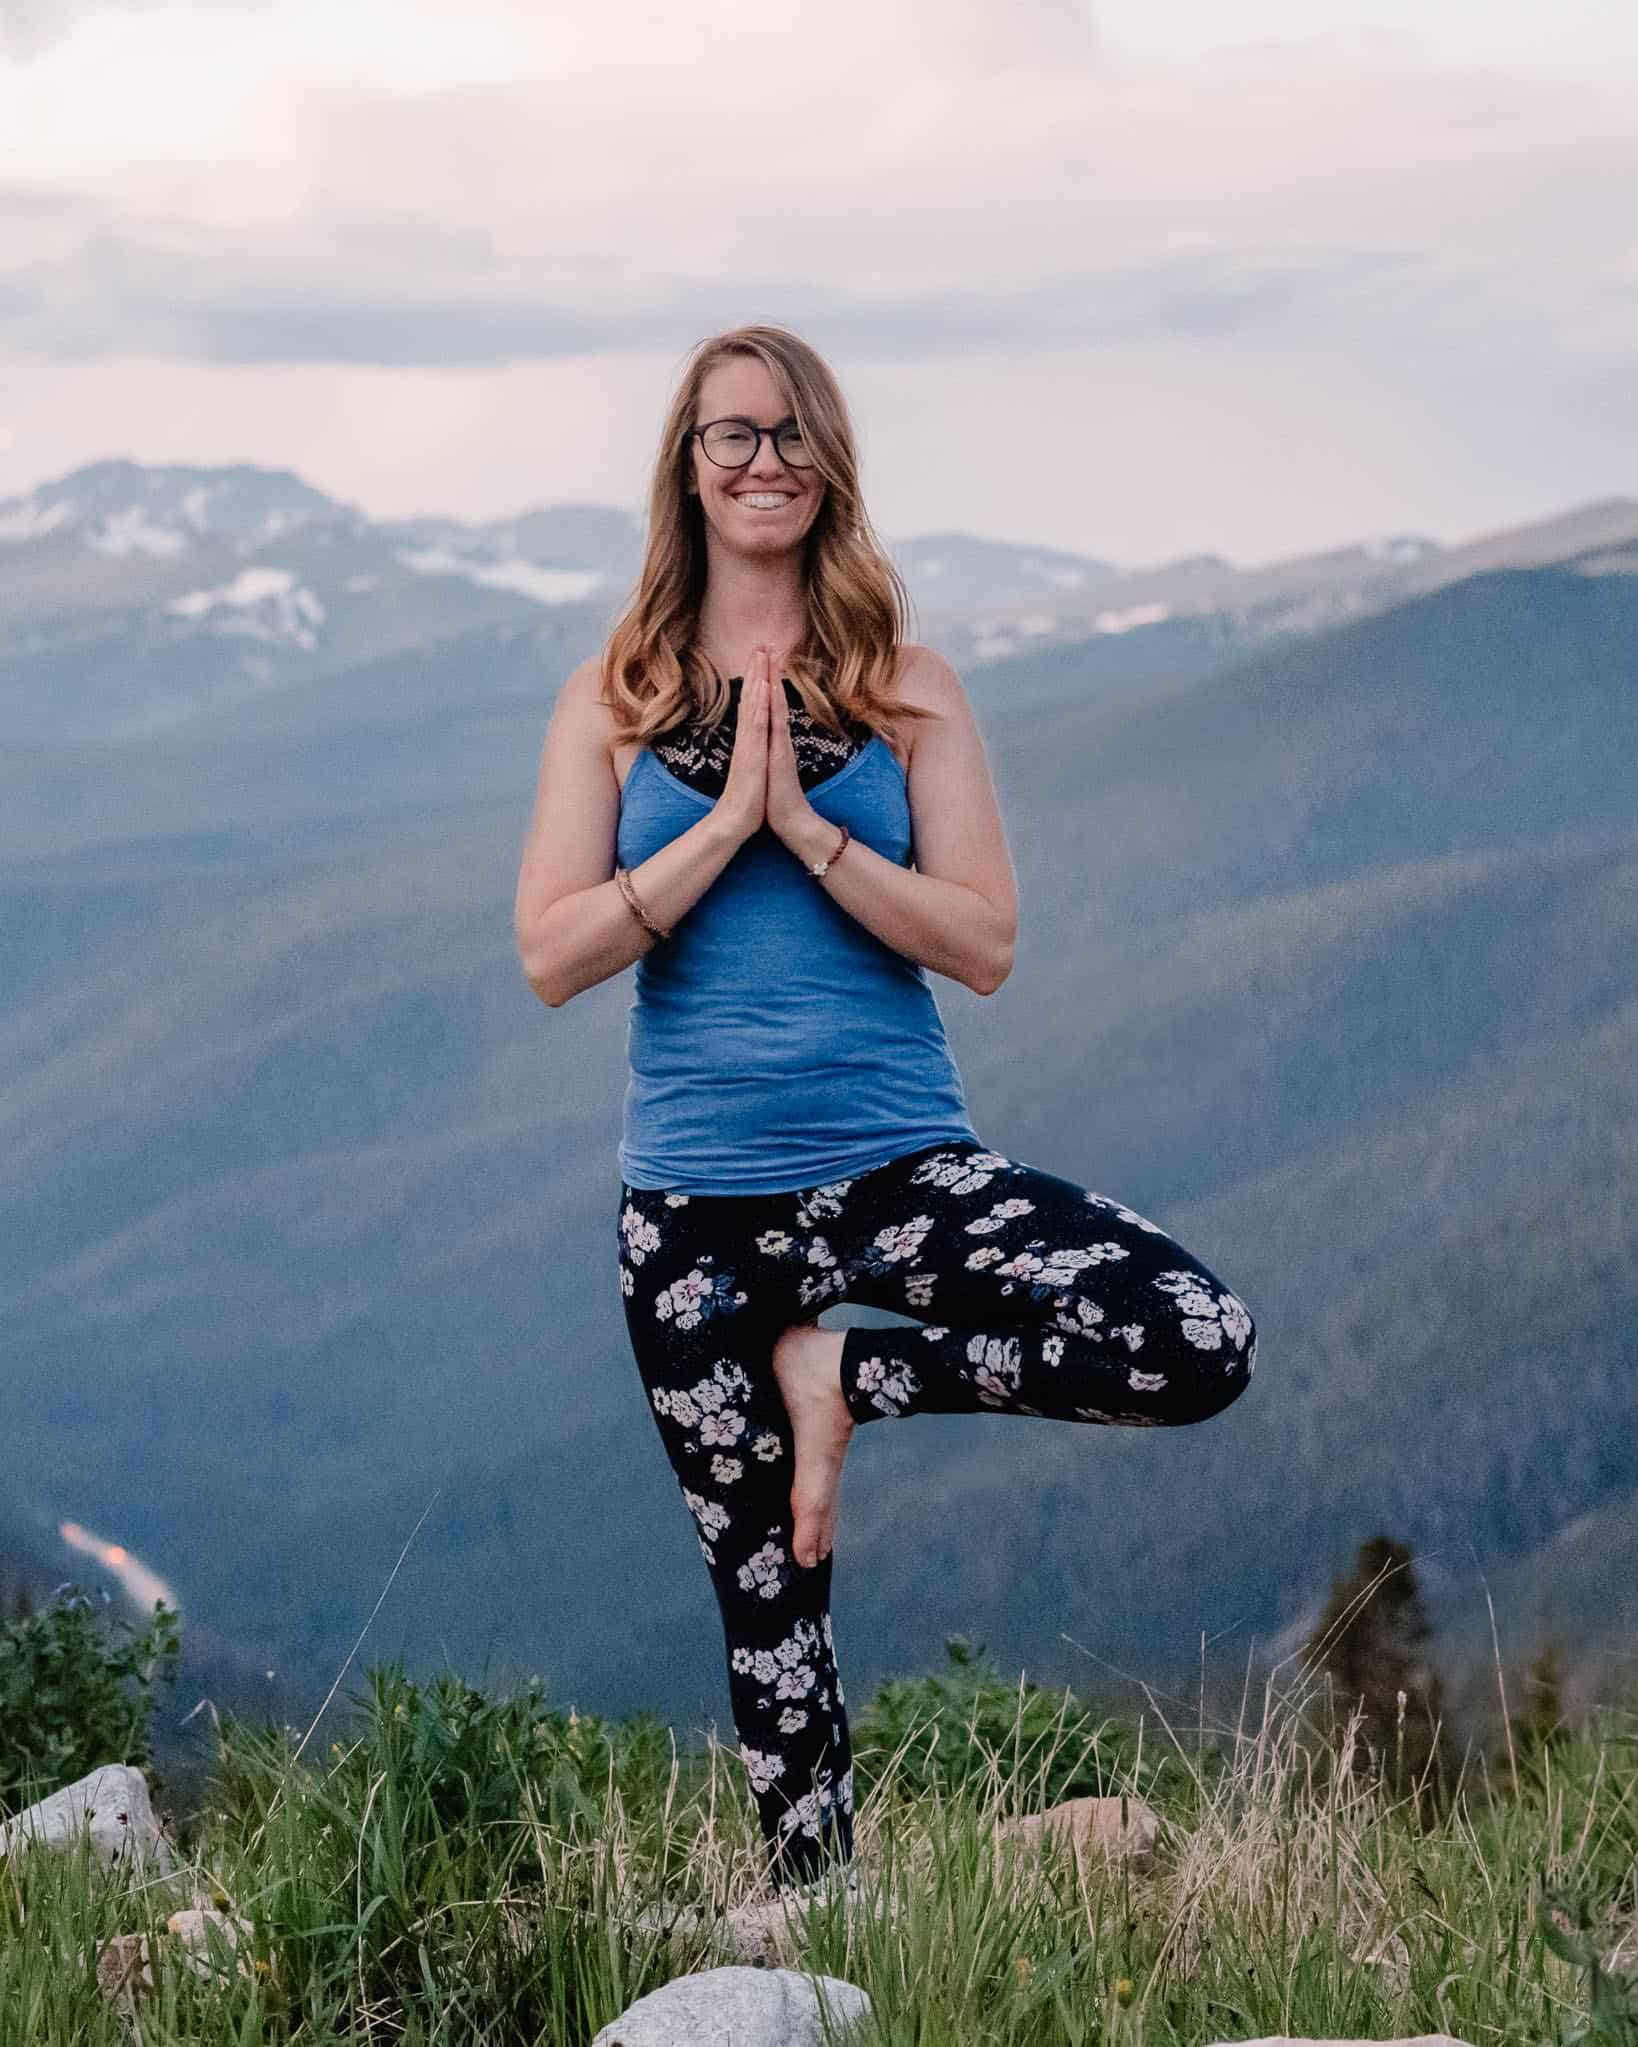 emmy doing yoga for tight shoulders on the top of a mountain doing tree pose with hands in namaste